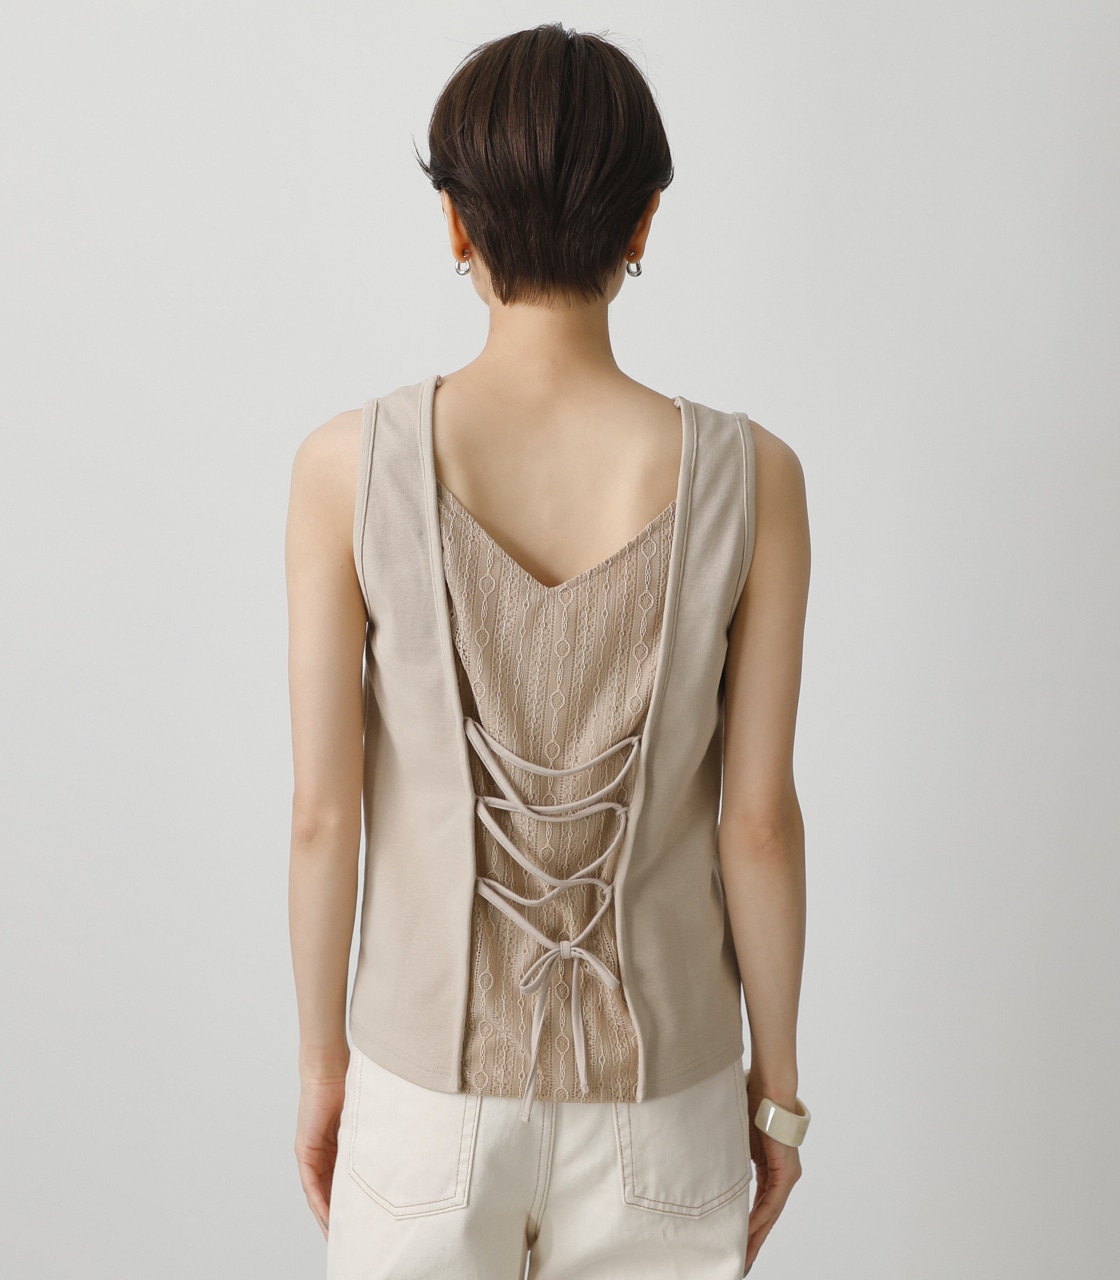 BACK LACE DOCKING TOPS/バックレースドッキングトップス 詳細画像 L/BEG 7